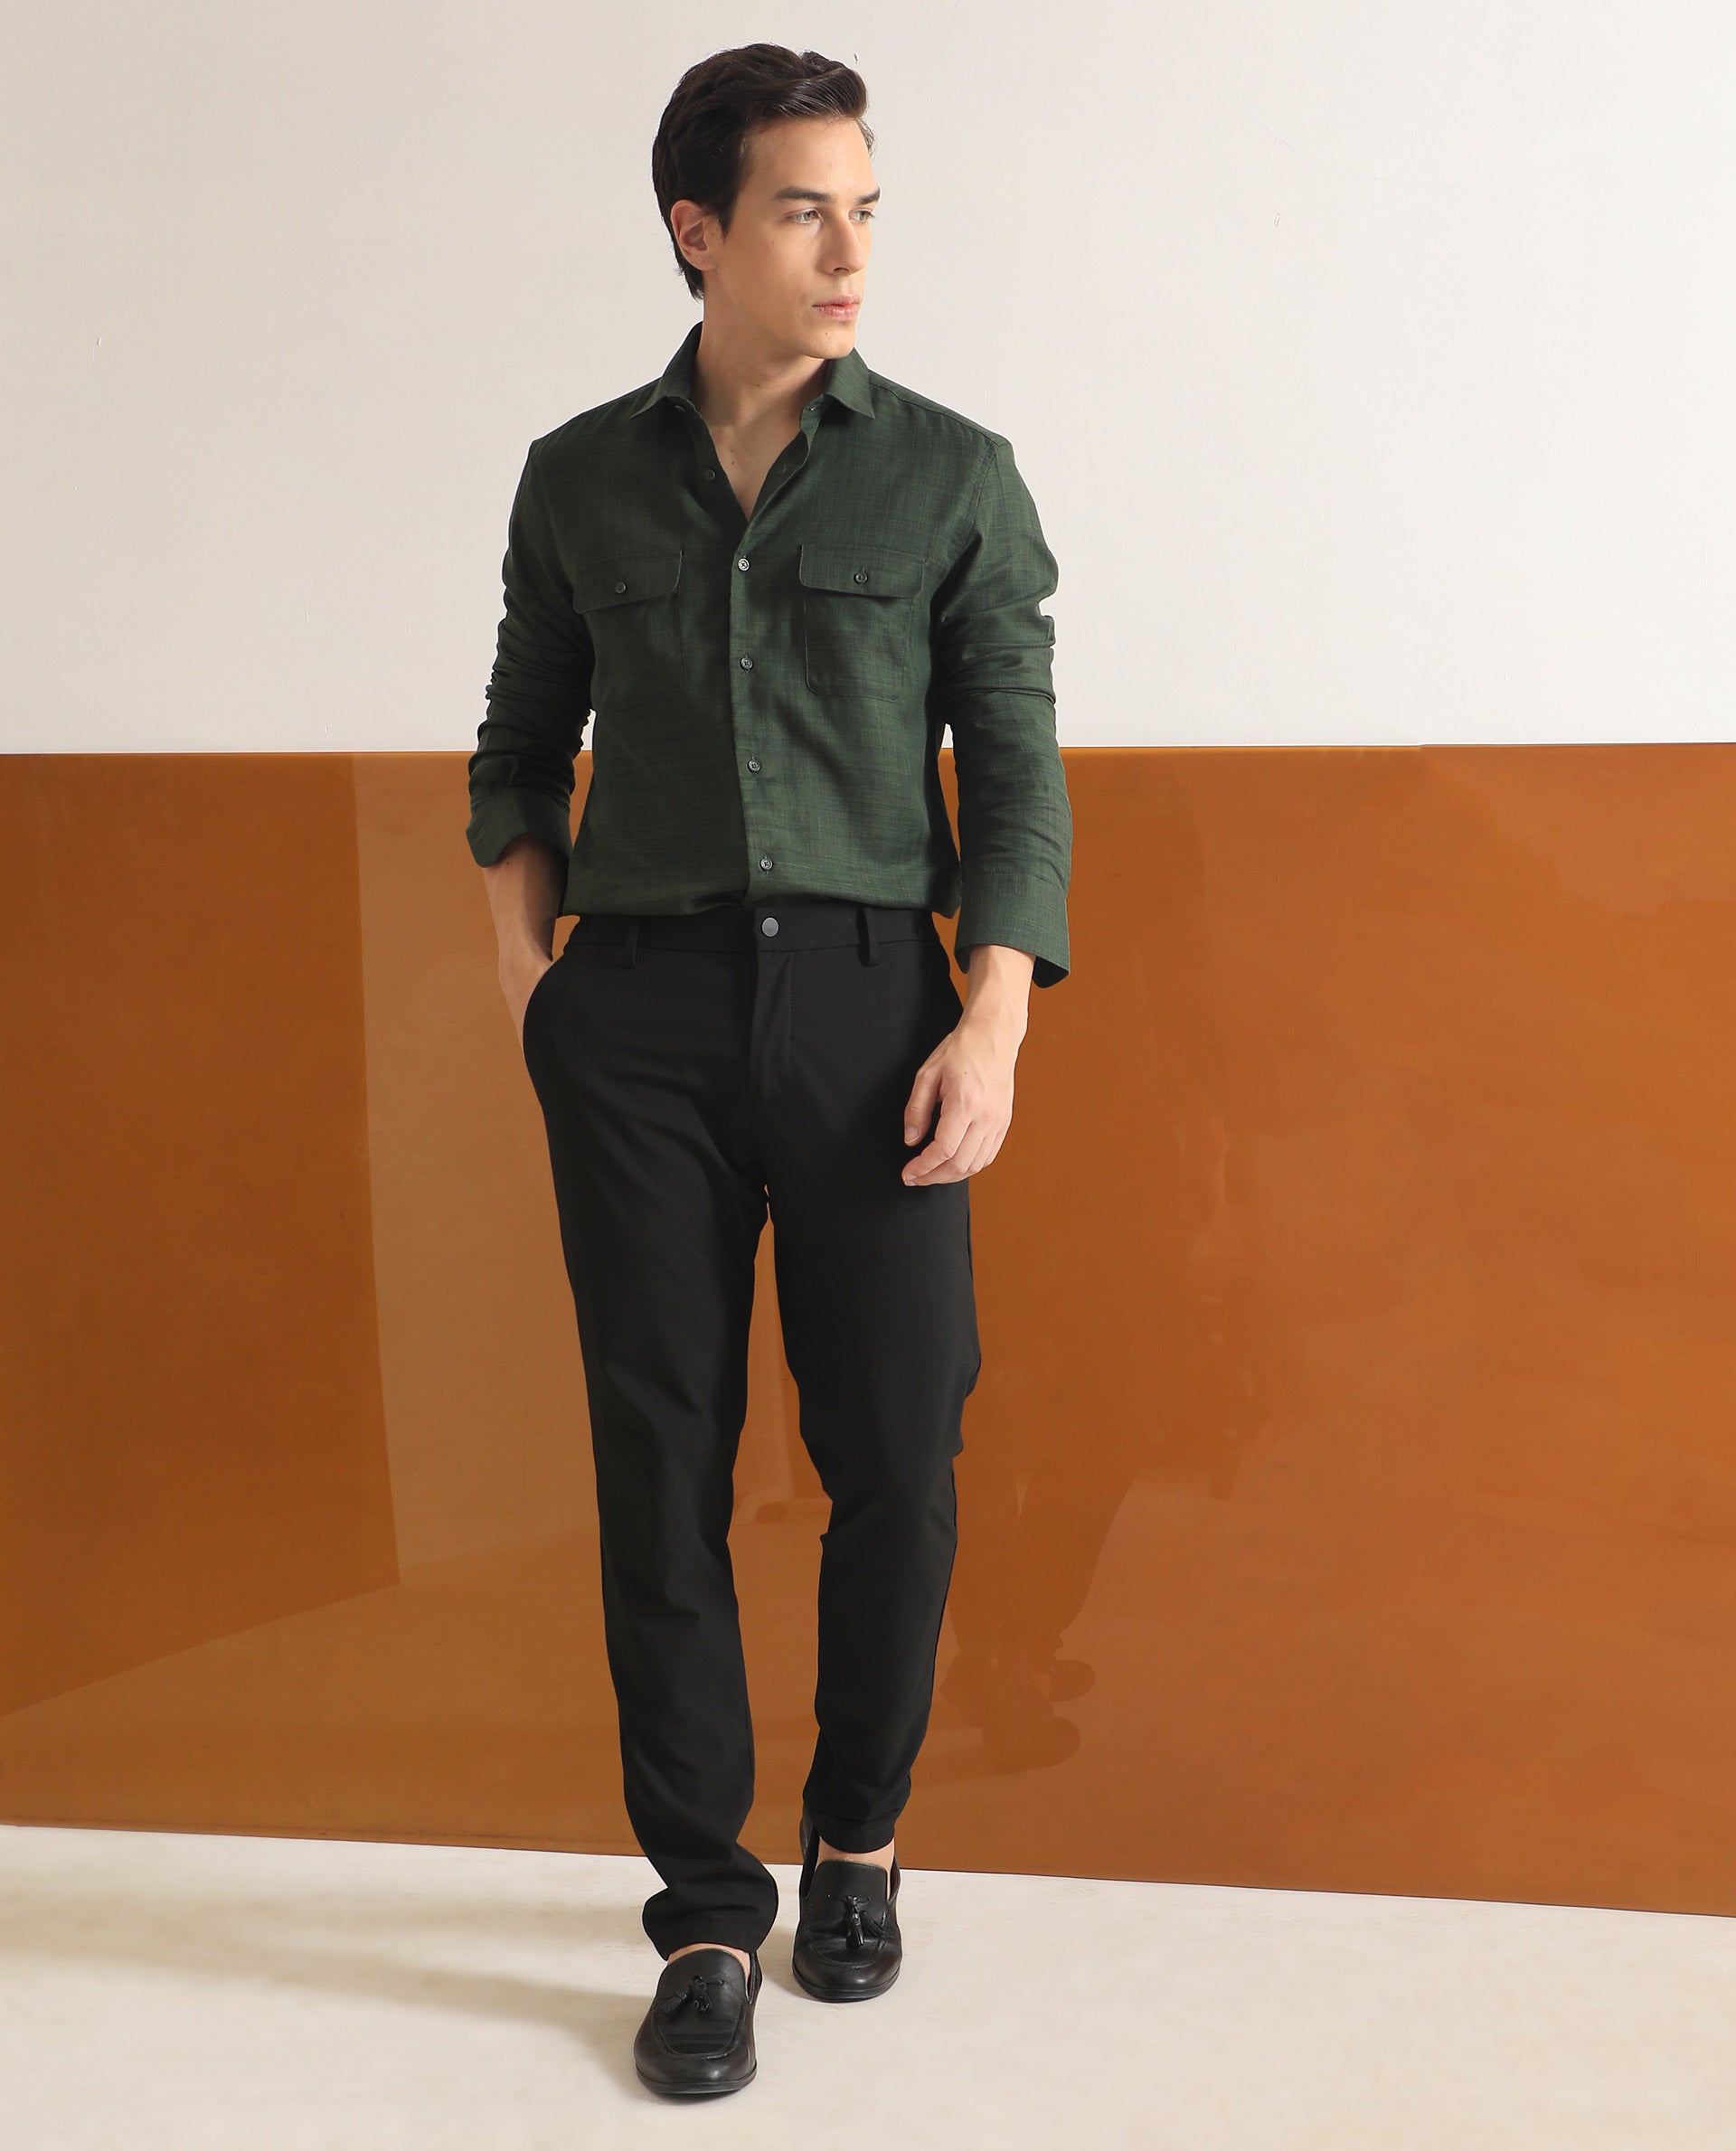 Olive Pants with White Shirt Casual Hot Weather Outfits For Men 7 ideas   outfits  Lookastic